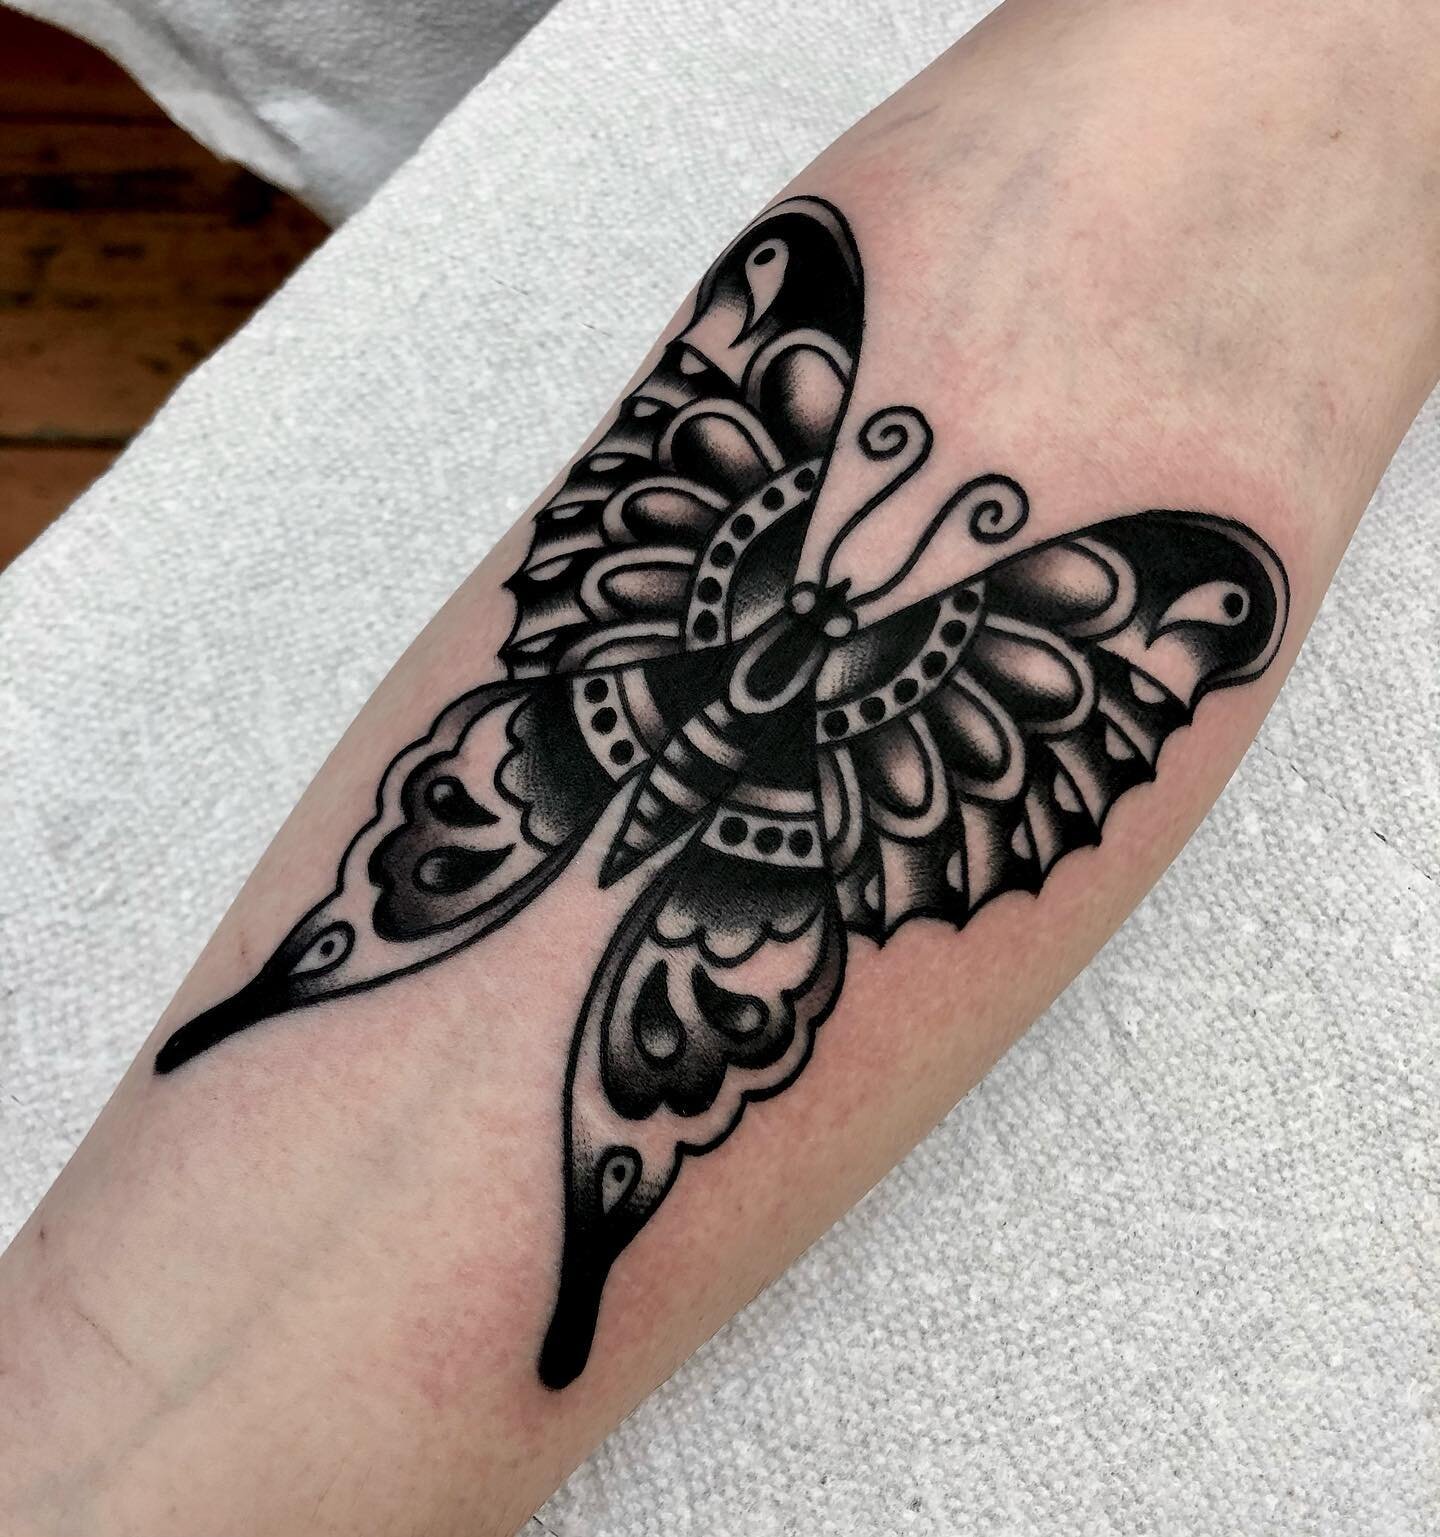 Really fun black and grey moth from the other day based on some color flash of mine that I kinda reworked for no color. Thanks for looking! #tattoo #tattoos #traditionaltattoos #bright_and_bold #skinart #oldlines #oldschooltattoo #traditionalclub #ta